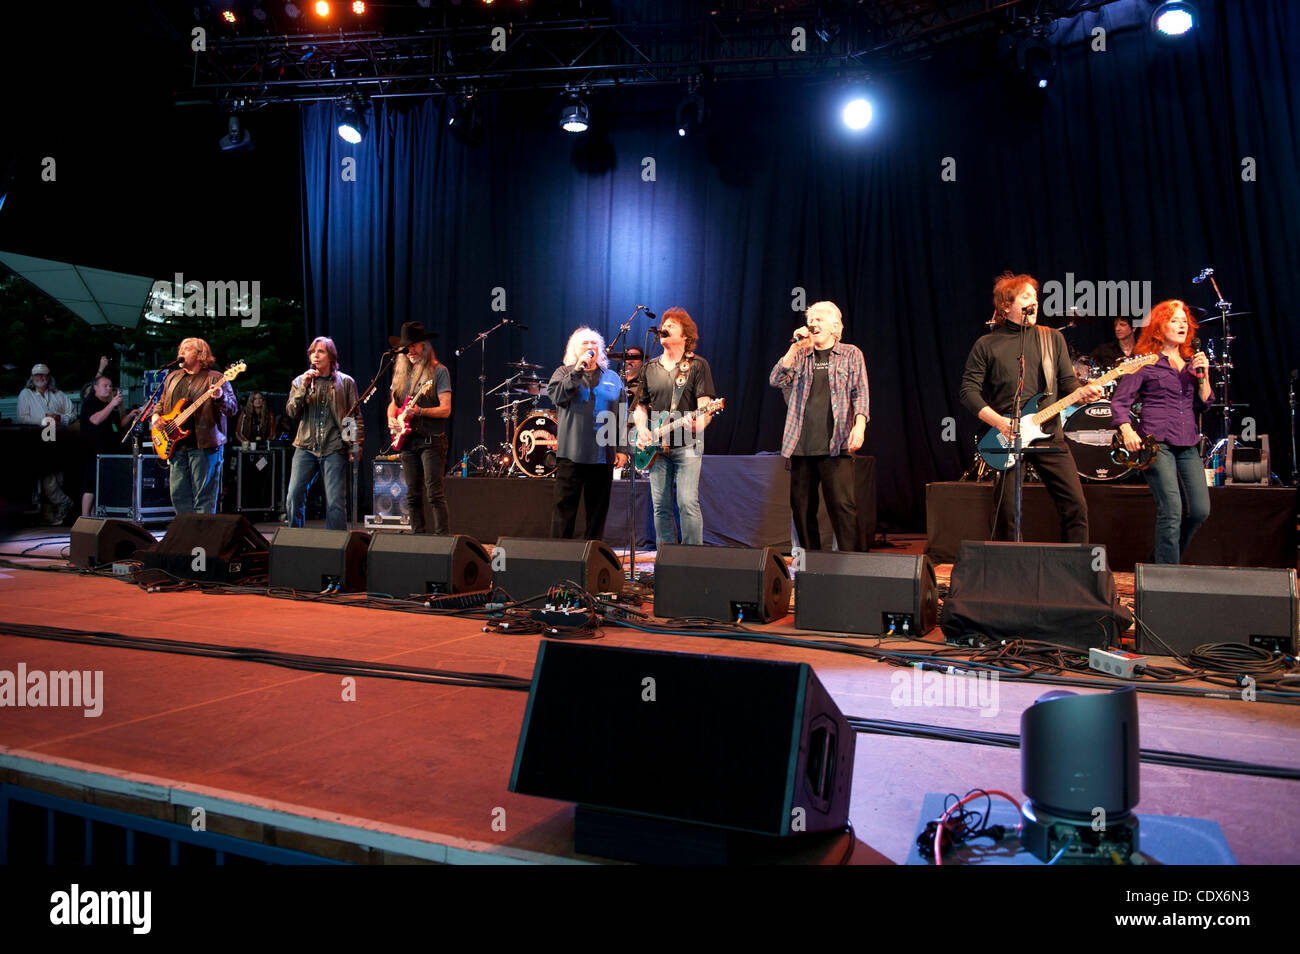 Aug 7, 2011 - Mountain View, California, USA - Jackson Brown, Patrick Simmons, David Crosby, Tom Johnston, Graham Nash, John McFee and Bonnie Raitt perform at the Musicians United for Safe Energy (M.U.S.E.) concert at the Shoreline Amphitheater. Proceeds for the all-star benefit will support Japan d Stock Photo